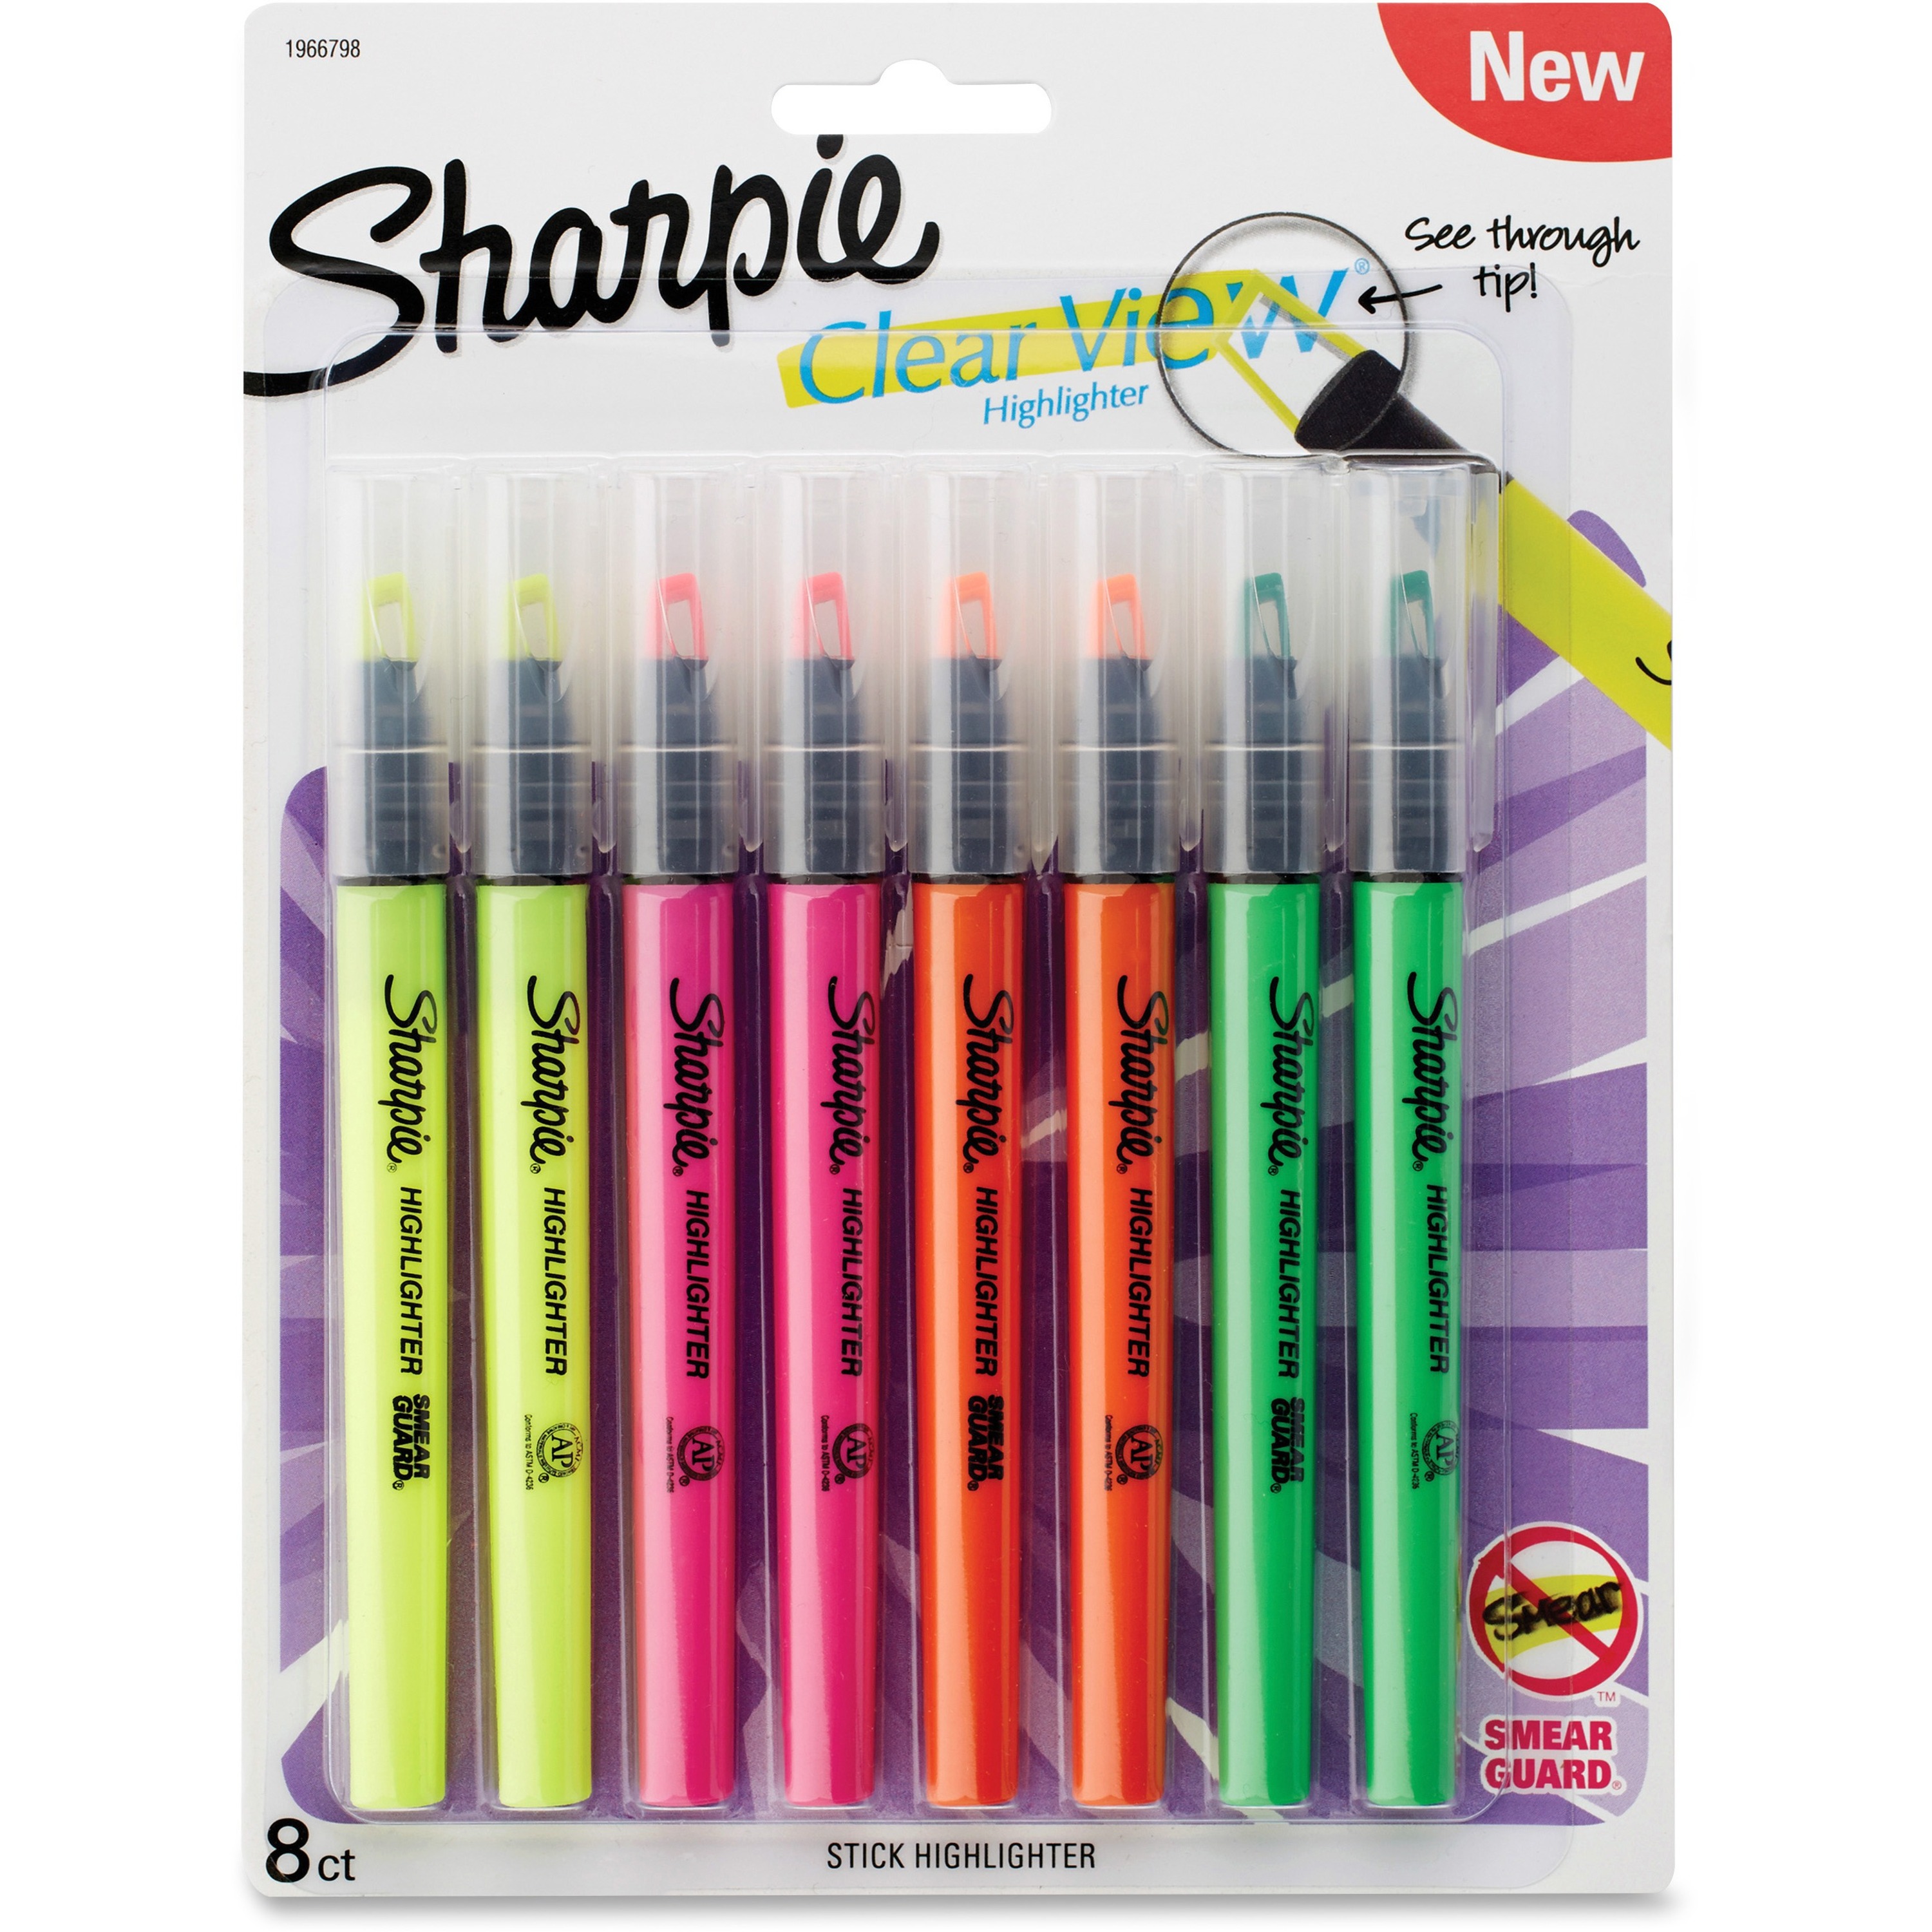 Sharpie Clear View Highlighter Chisel Tip Pink 12 Pack 